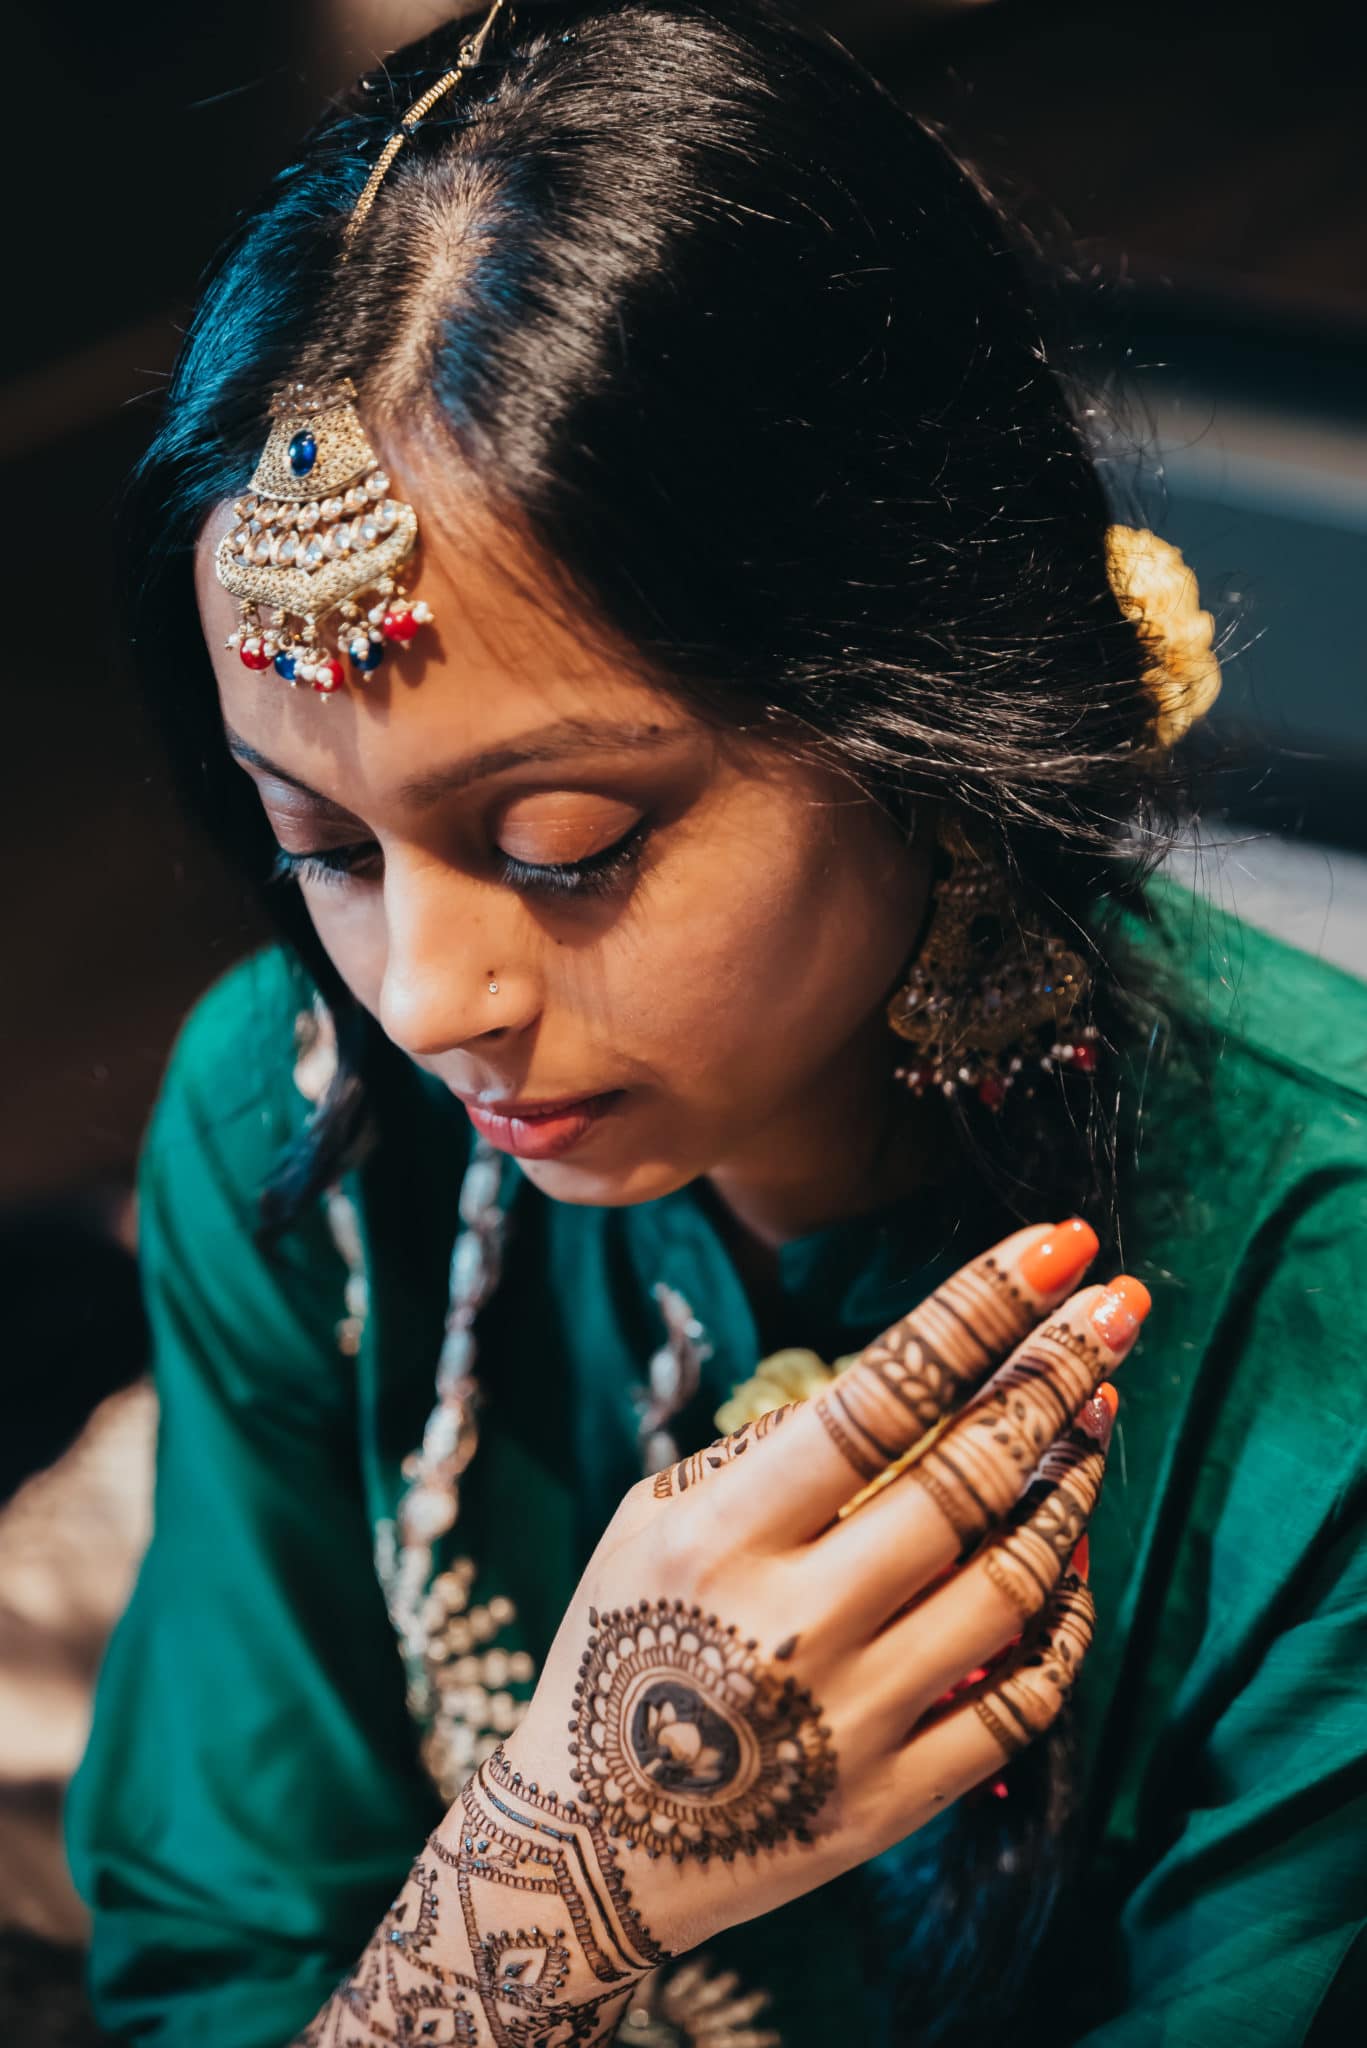 Pre-wedding Vidhi ceremony in an Indian wedding ceremony, Barnet, Potters Bar London